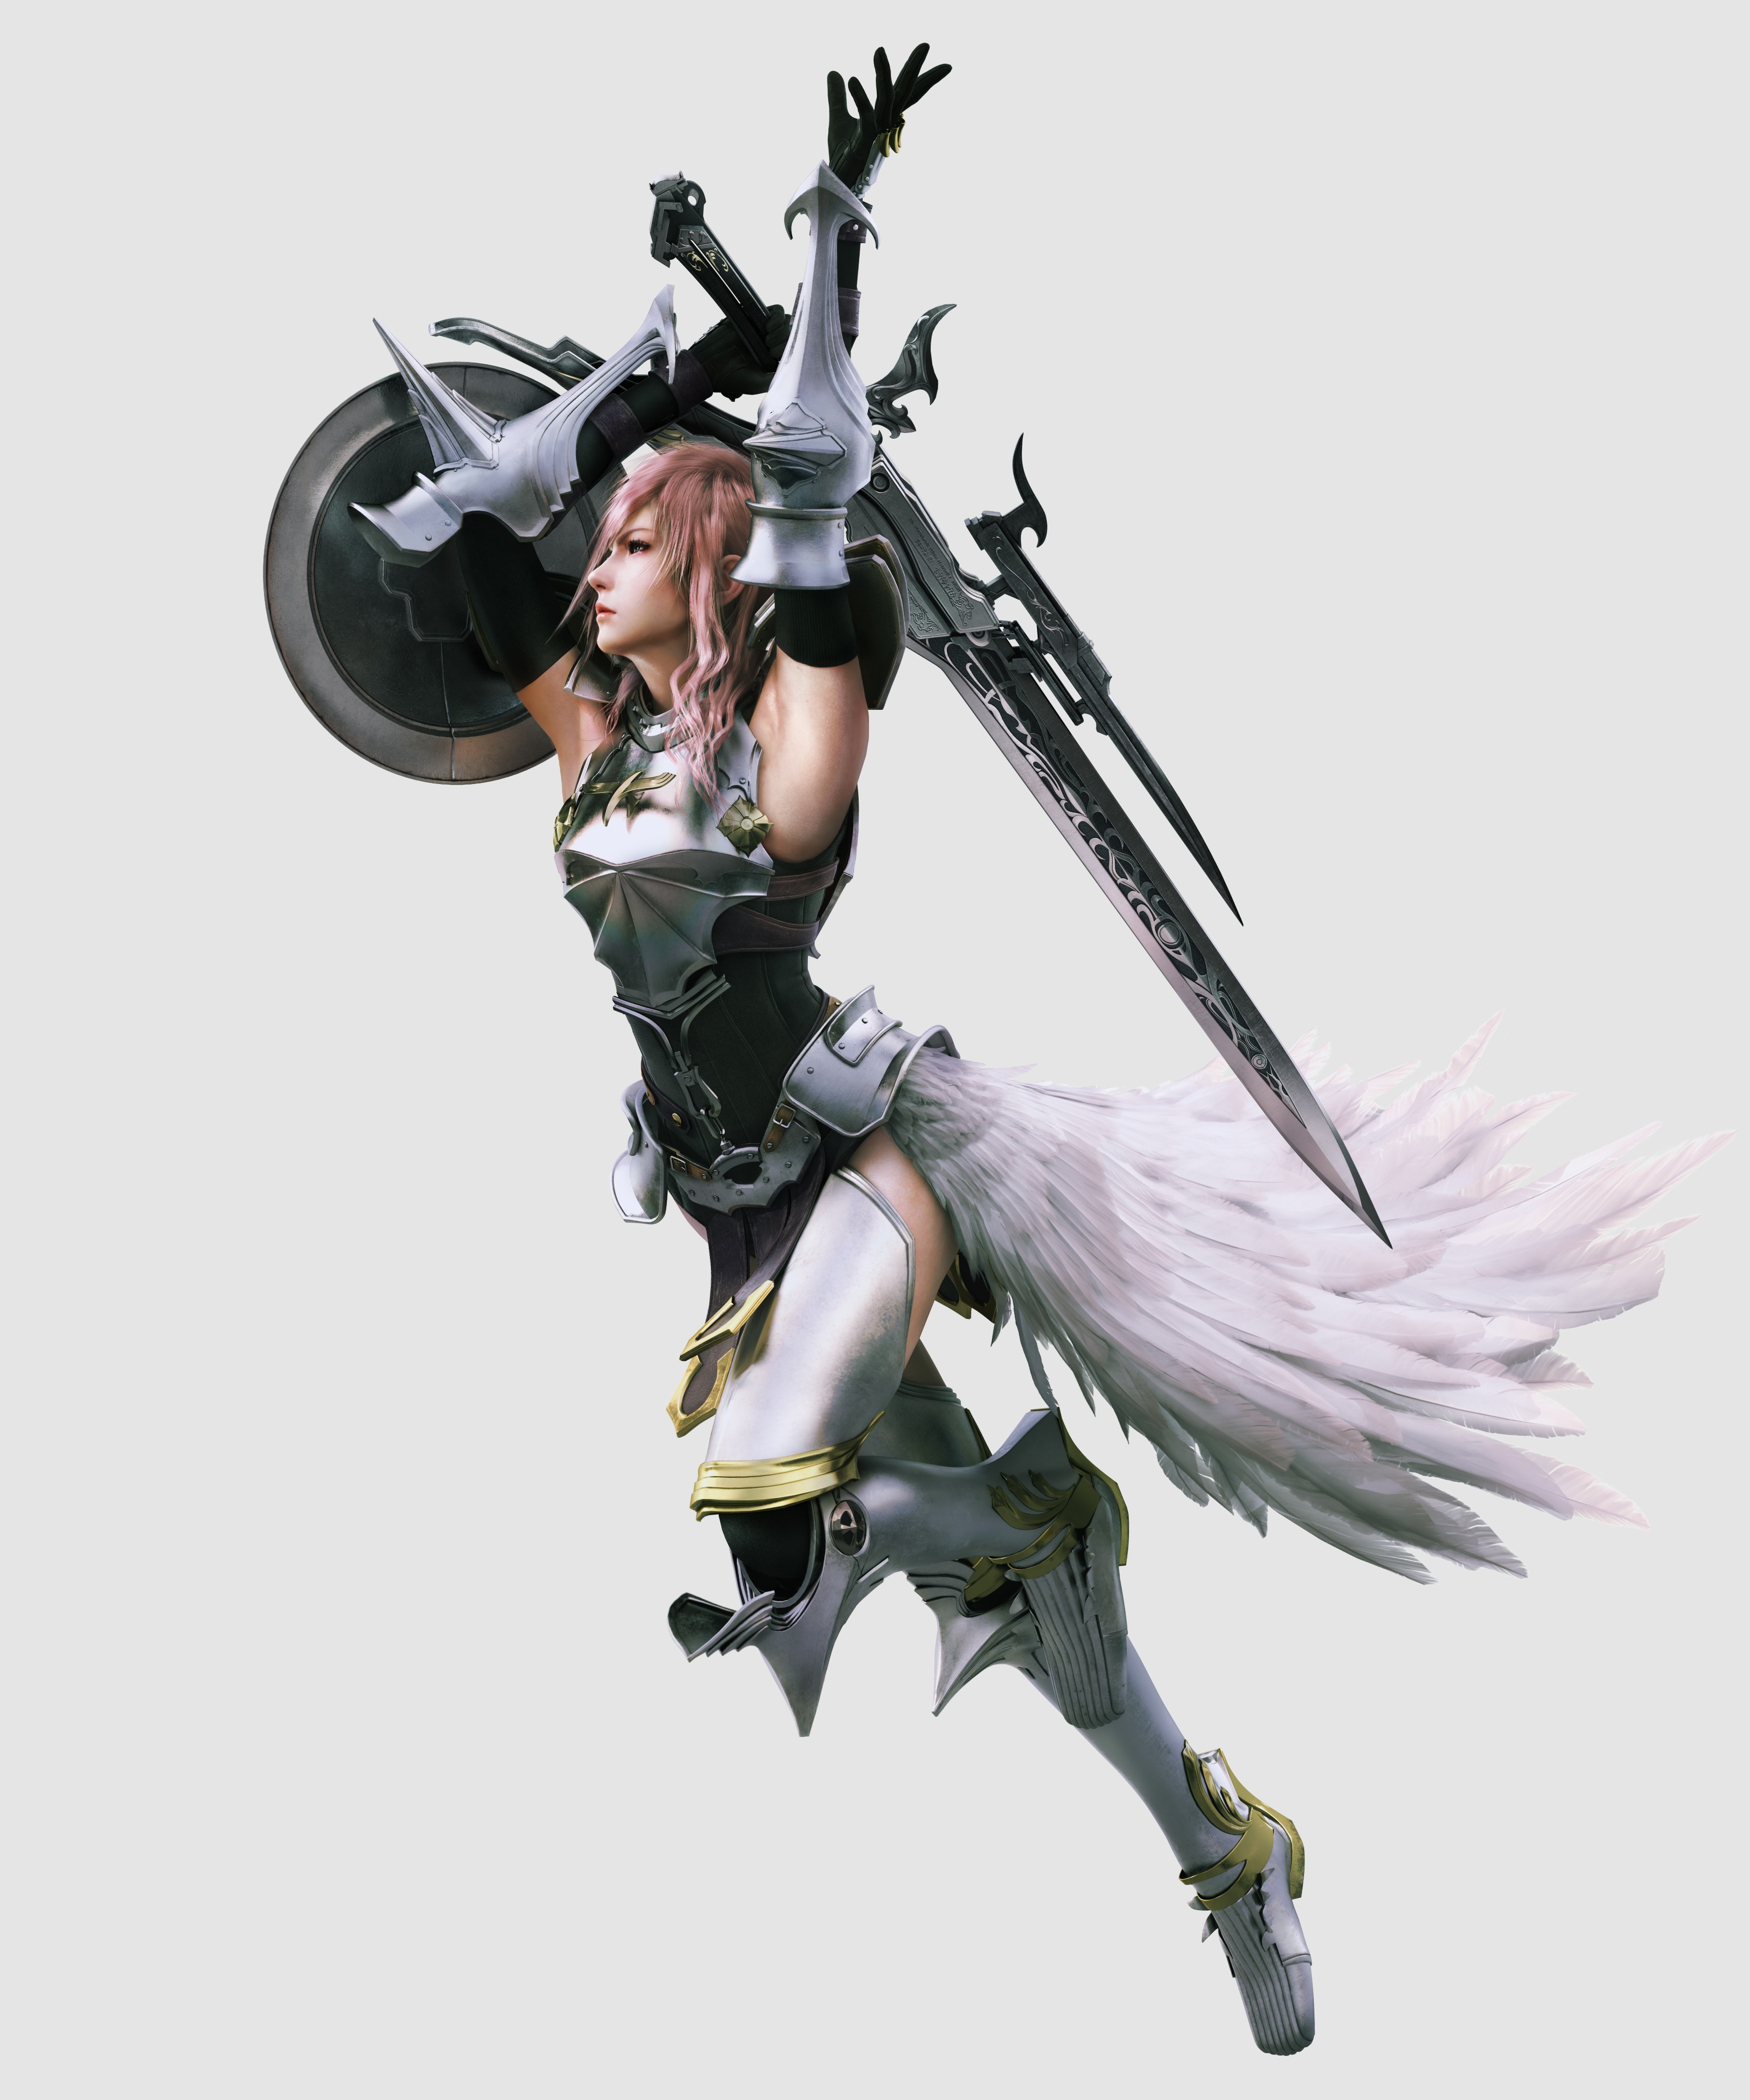 General 3375x4050 Final Fantasy XIII Claire Farron video games sword video game art video game girls women with swords simple background white background fantasy art fantasy girl